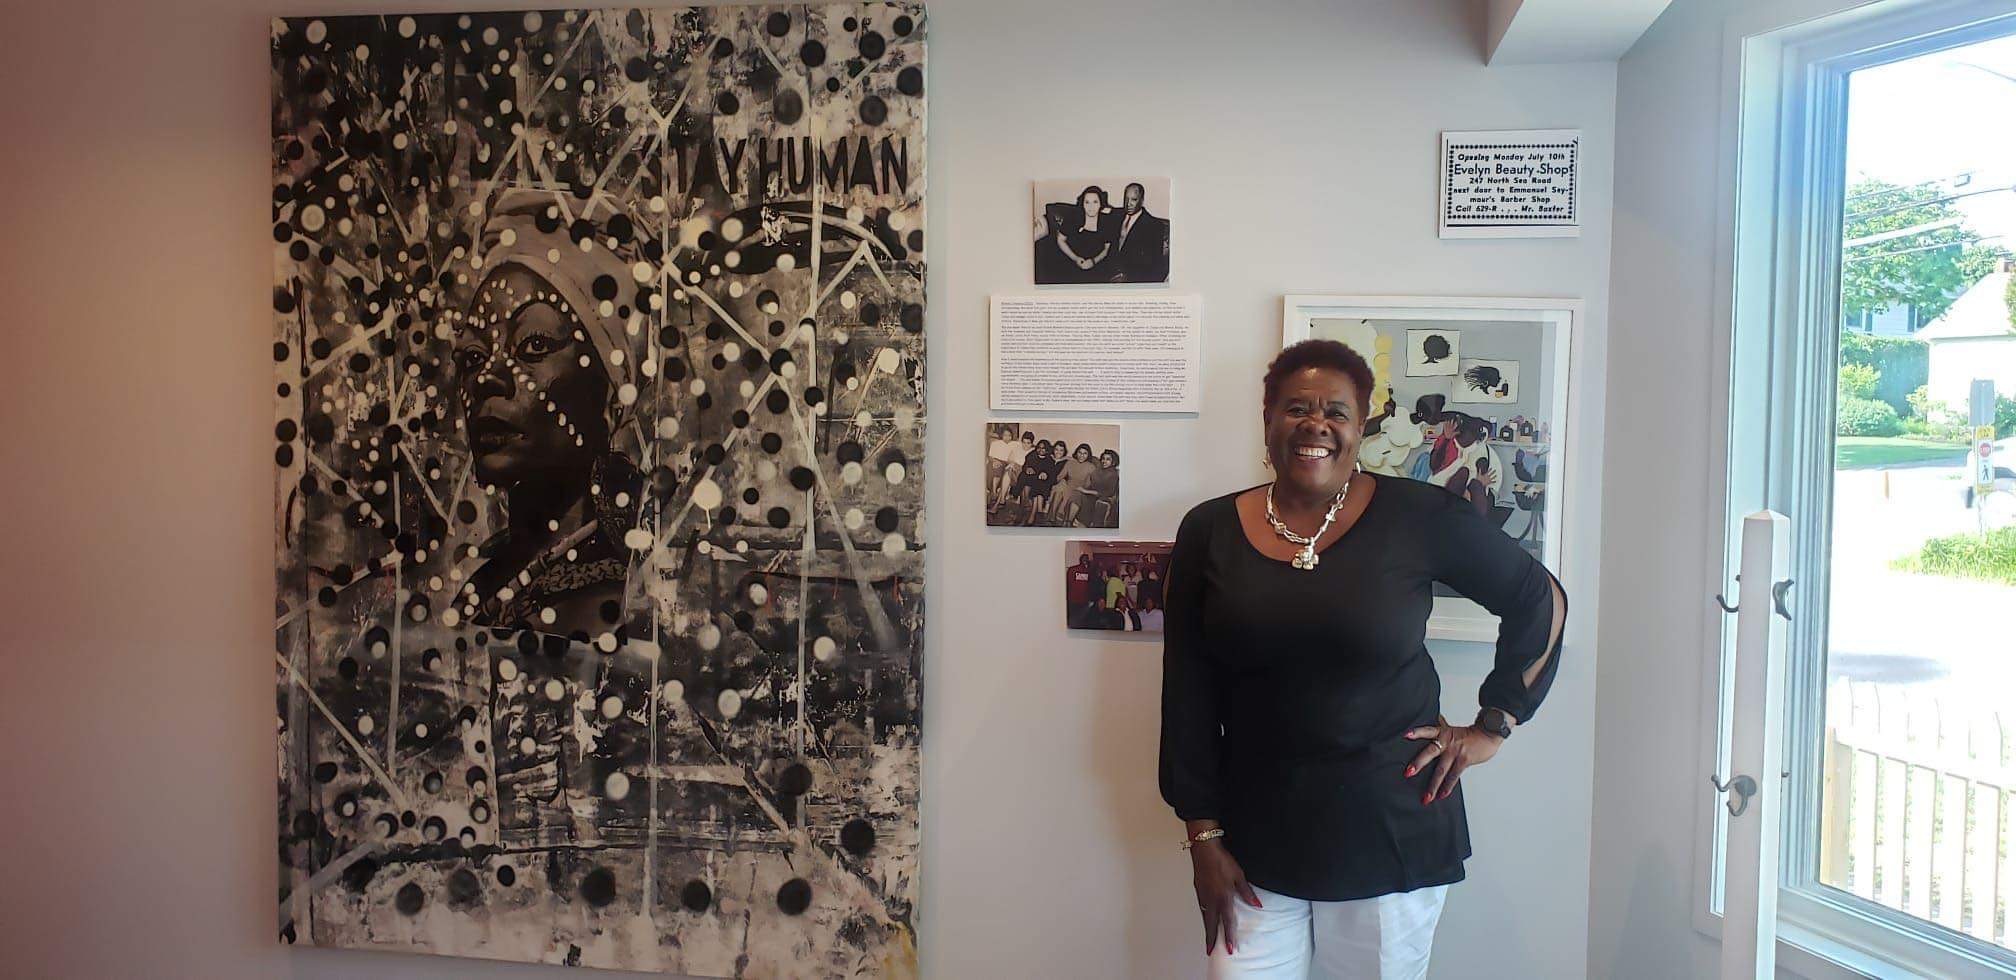 Southampton African American Museum Executive Director Brenda Simmons next to a painting that will be part of the interactive experience being integrated into the museum this spring. The painting will provide a jumping off point for visitors to learn about Black hairstyles and the history and culture surrounding Black hair care for women.